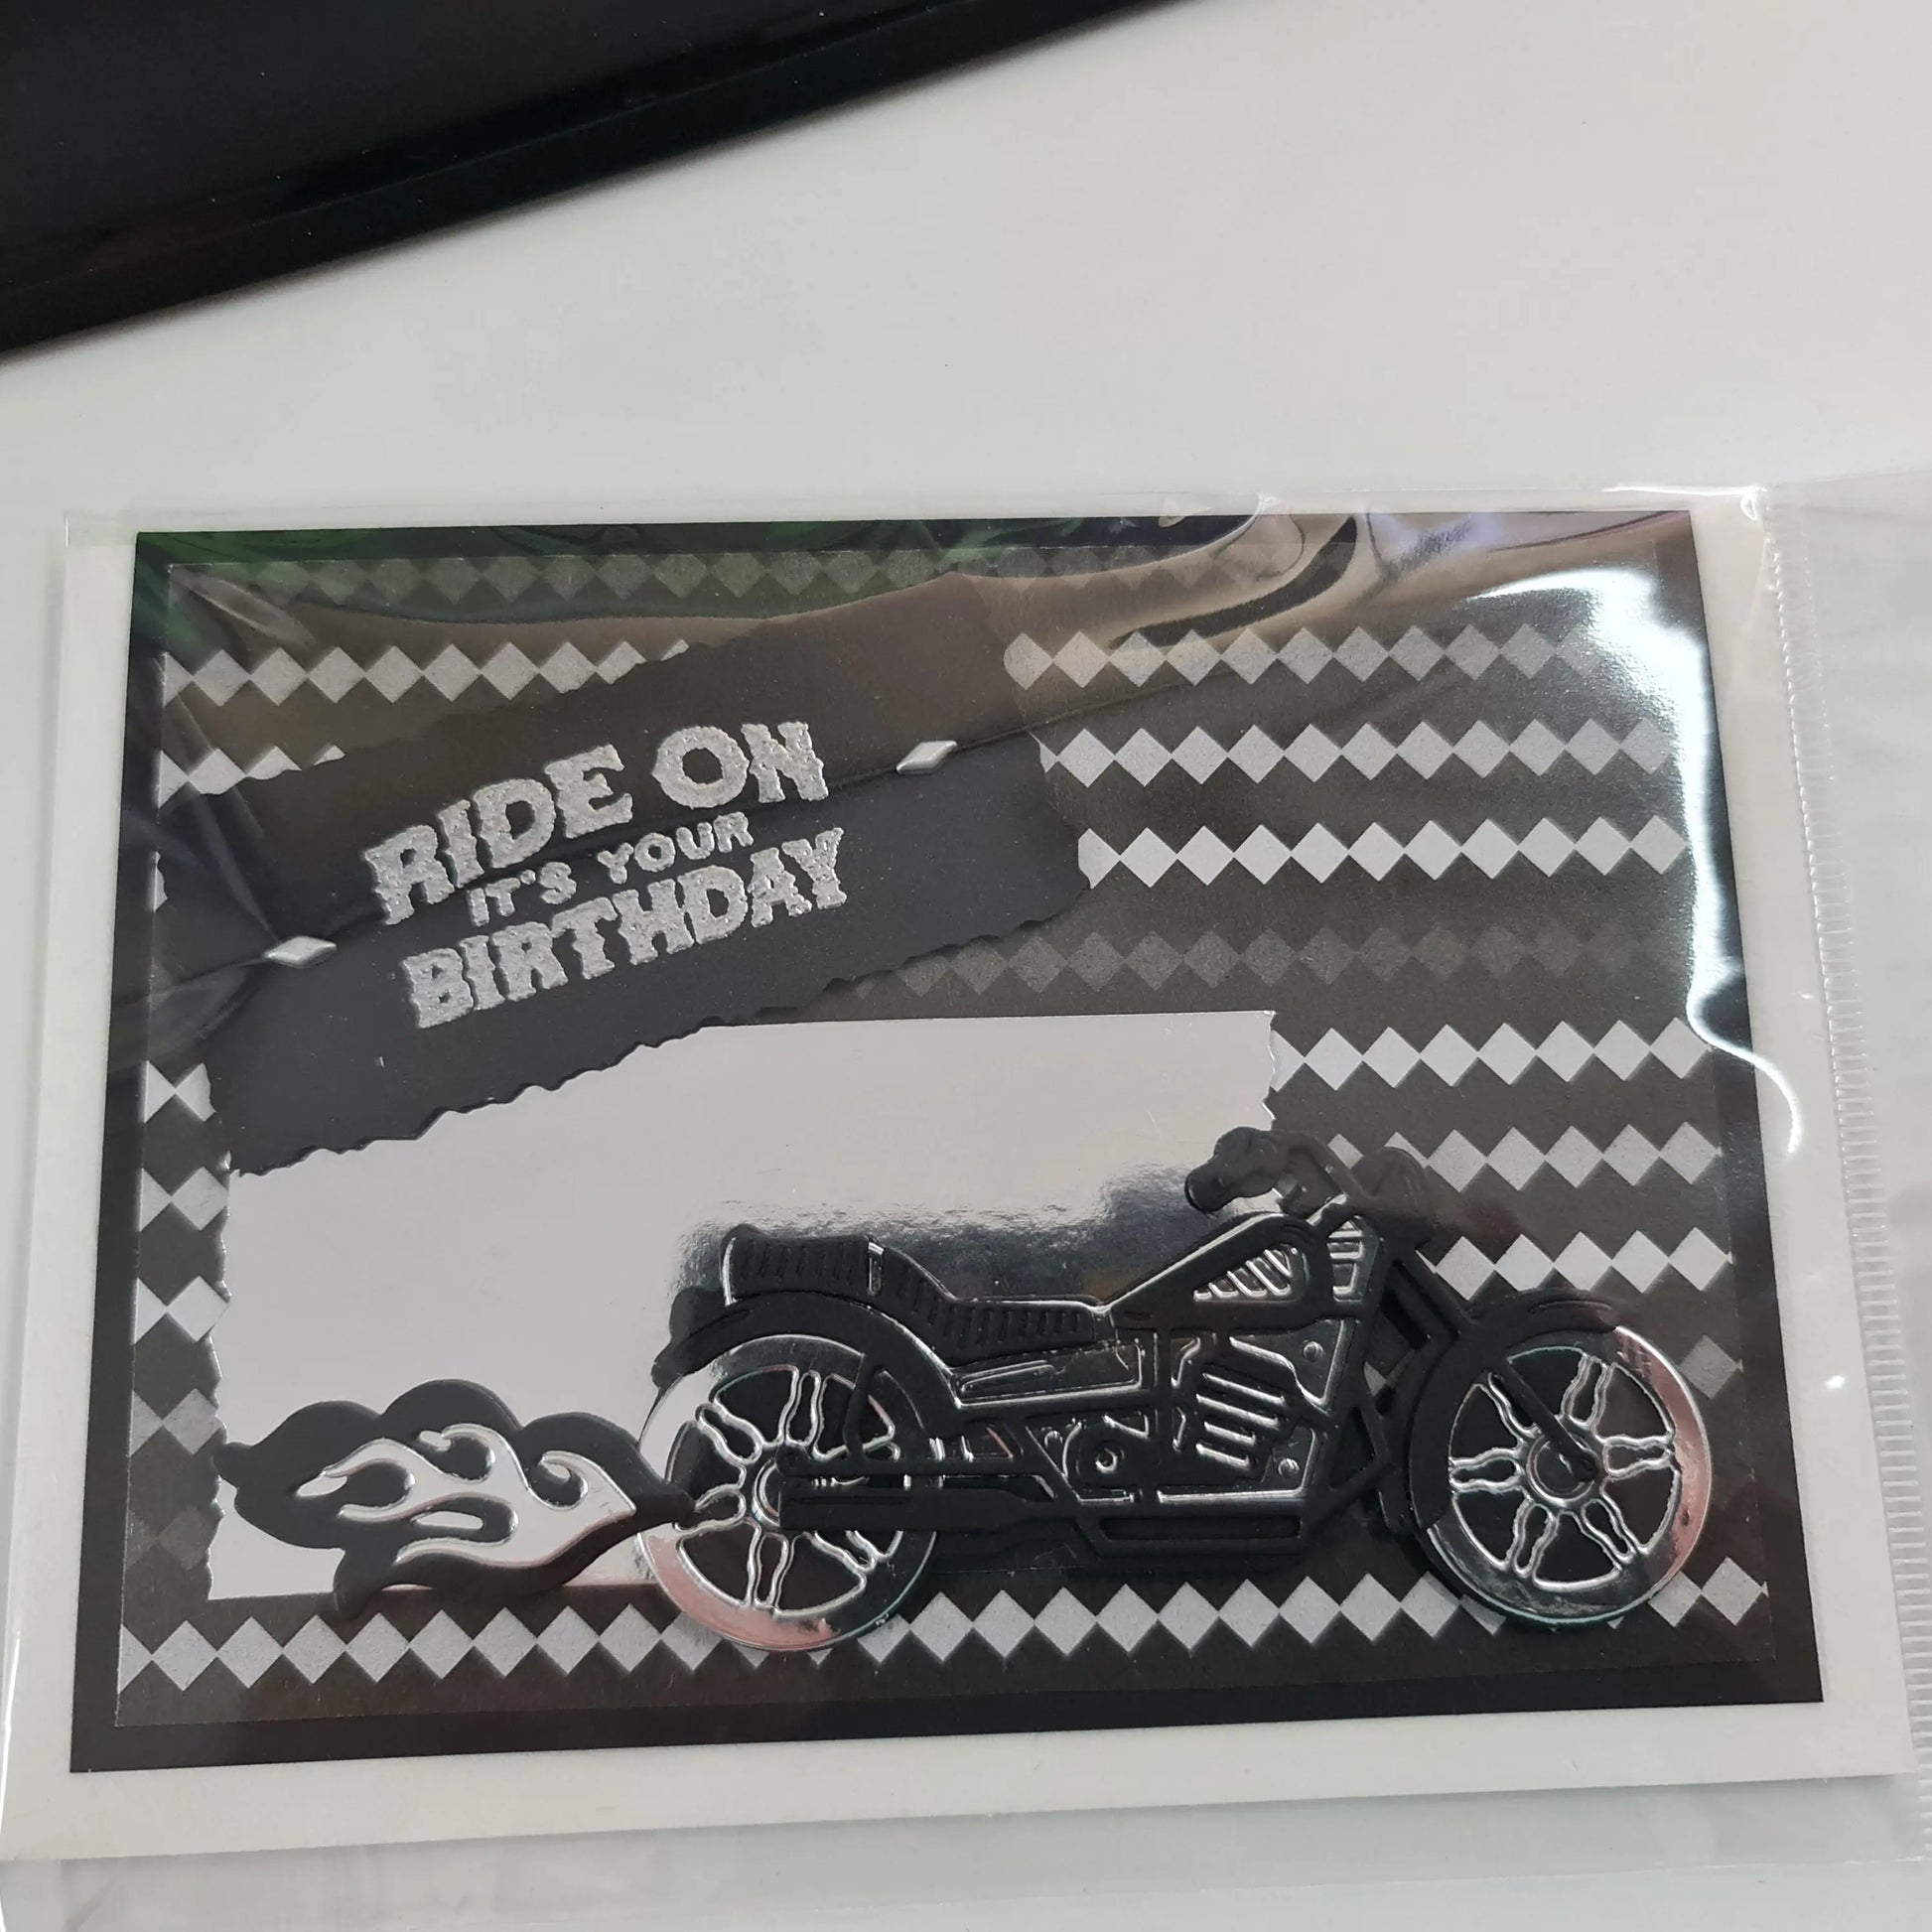 Ride on it's your birthday - A6 Card Paper Love Cards